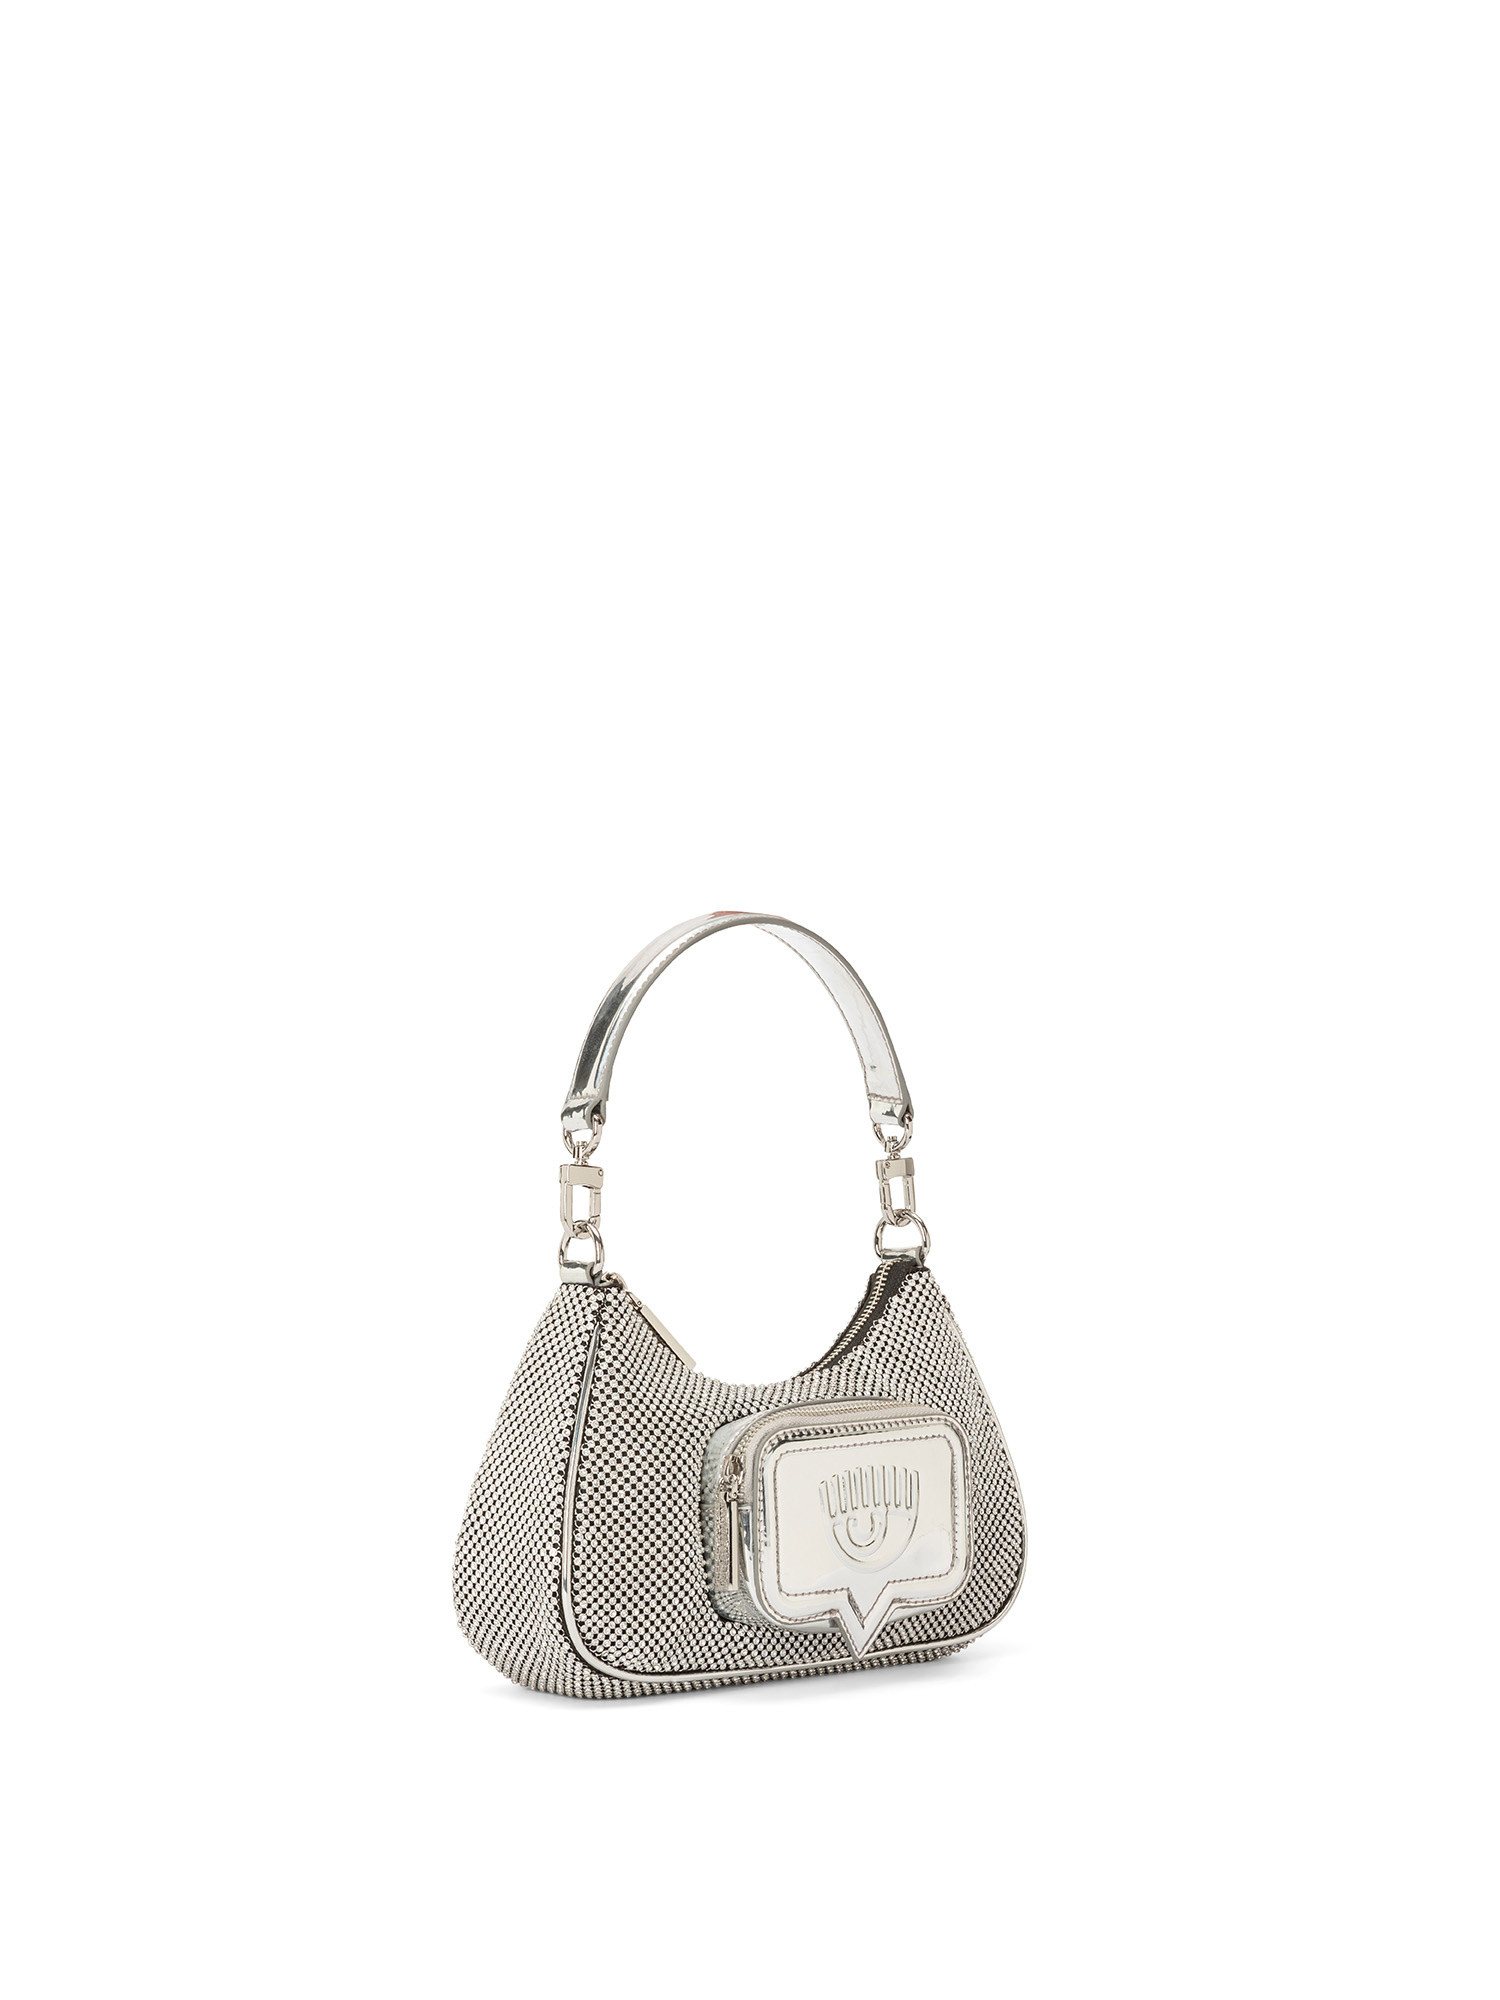 Borsa hobo in strass, Grigio, large image number 1